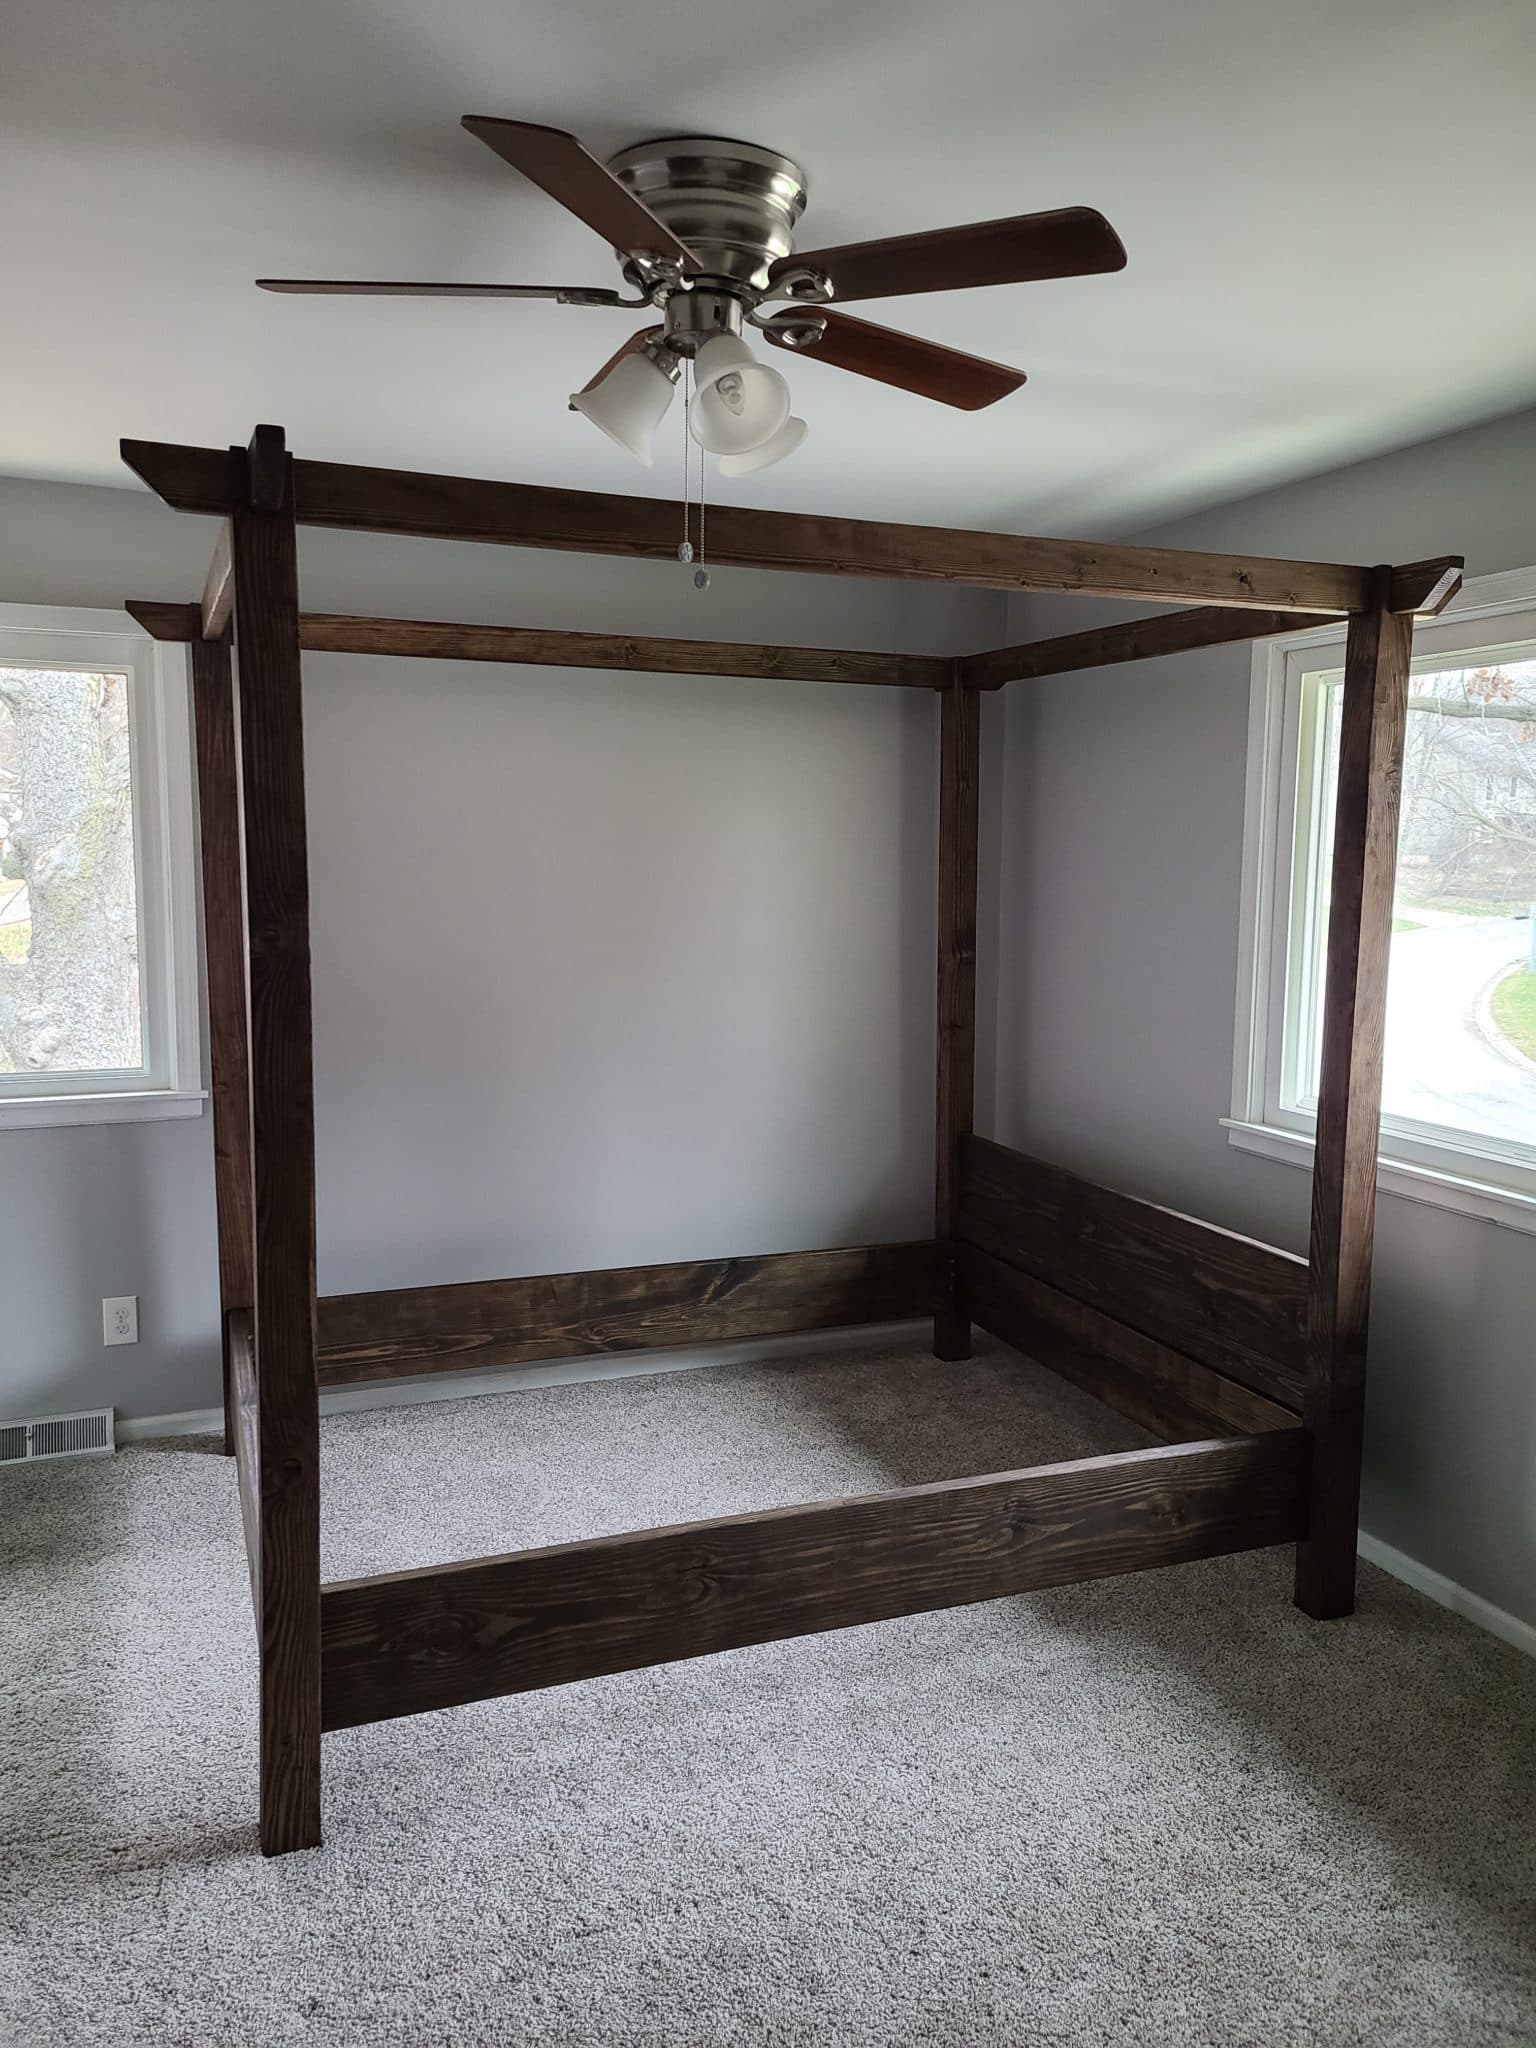 DIY canopy bed overall